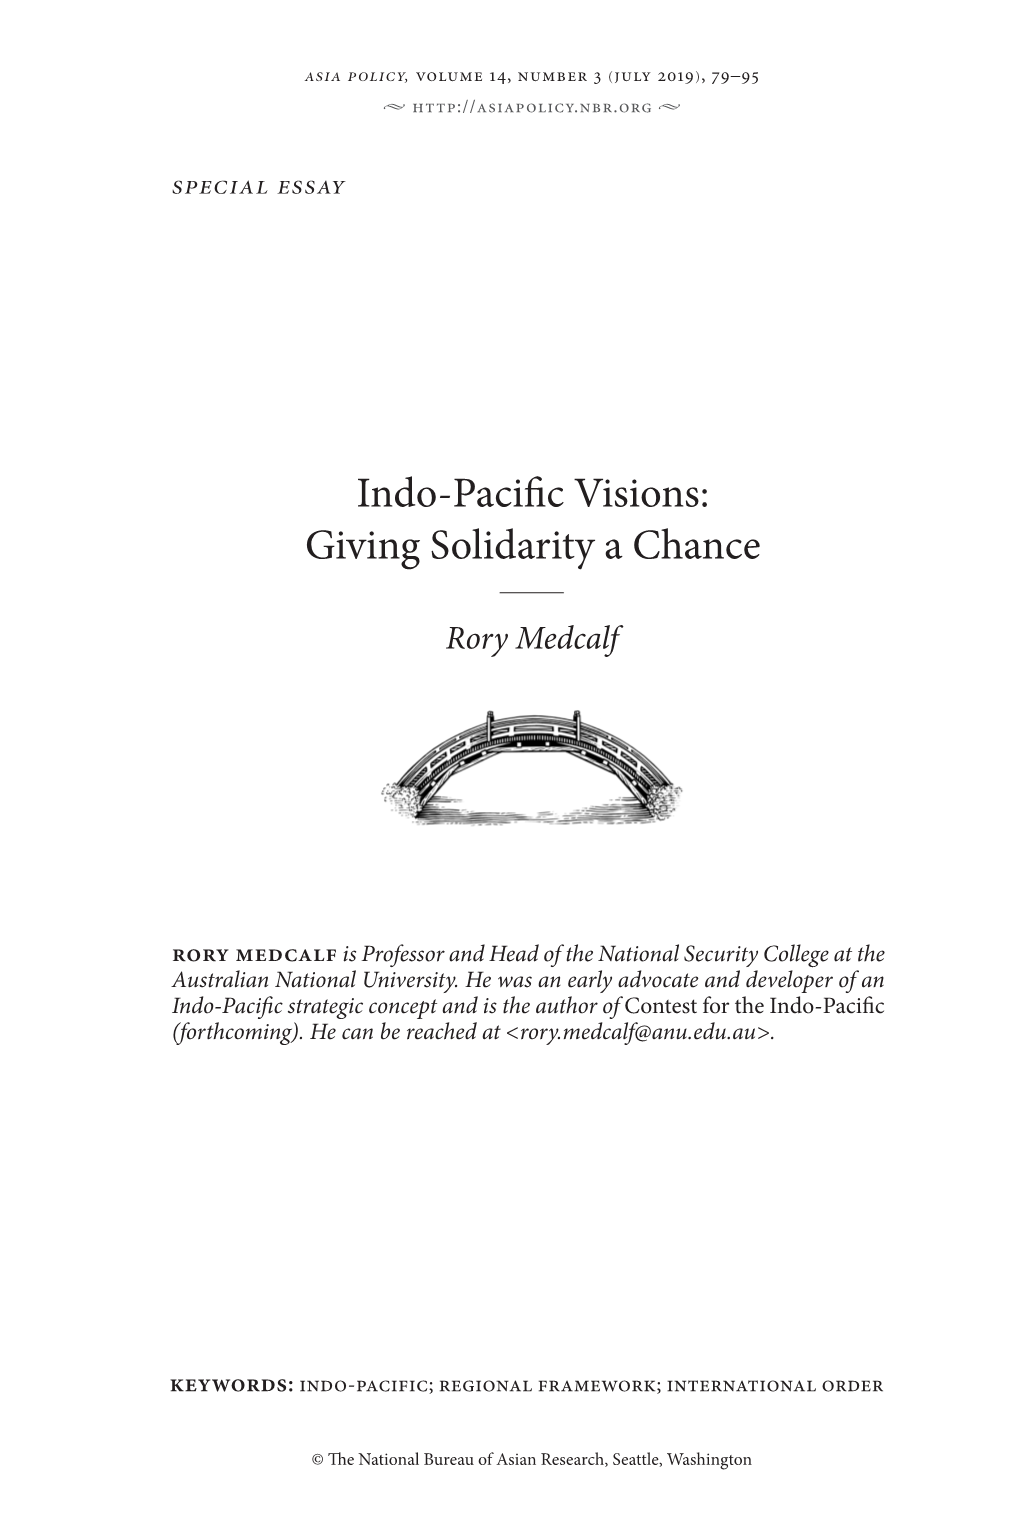 Indo-Pacific Visions: Giving Solidarity a Chance